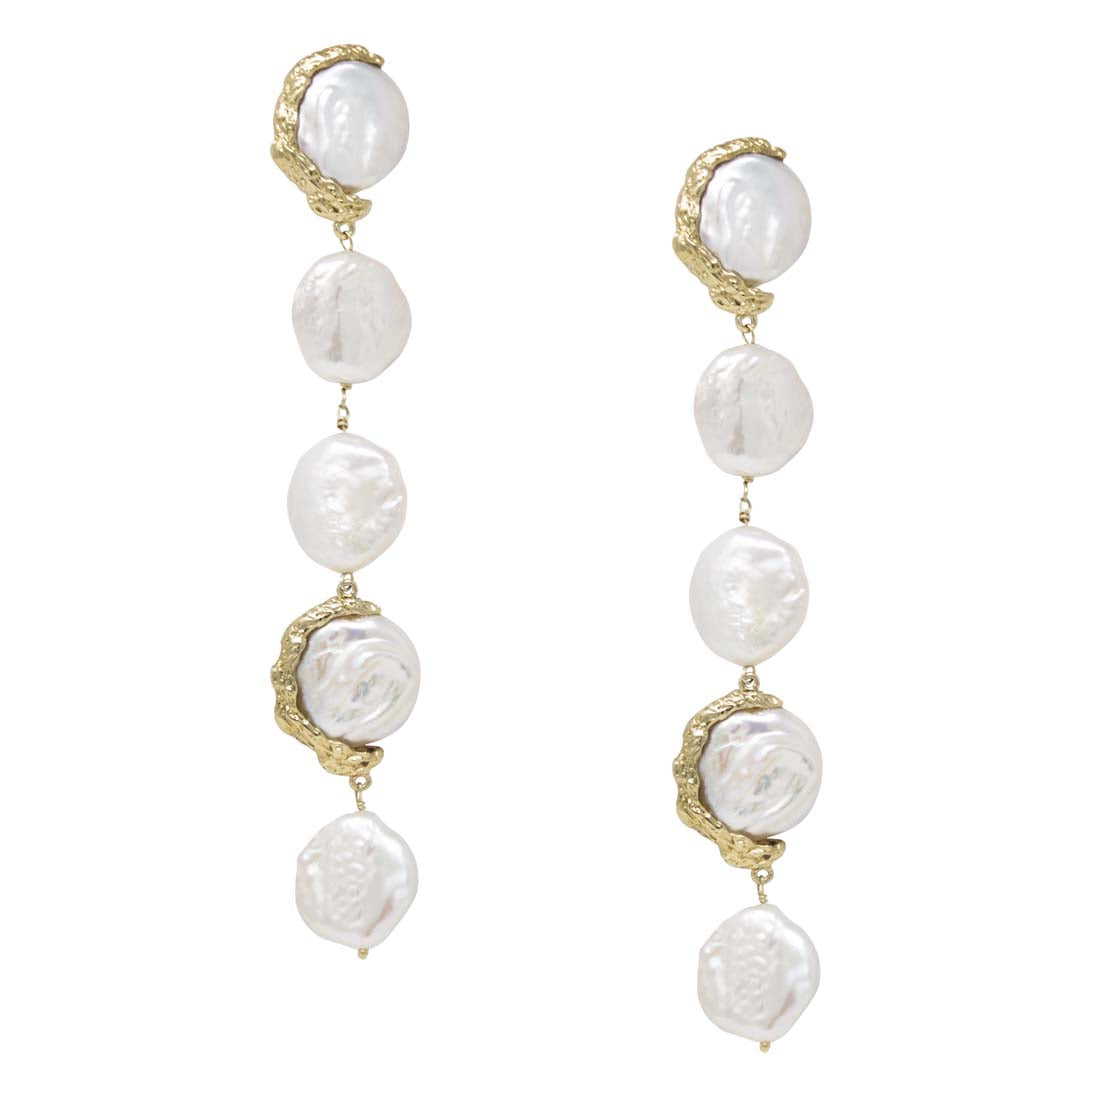 Ad Astra Gold-plated Pearl Statement Earrings